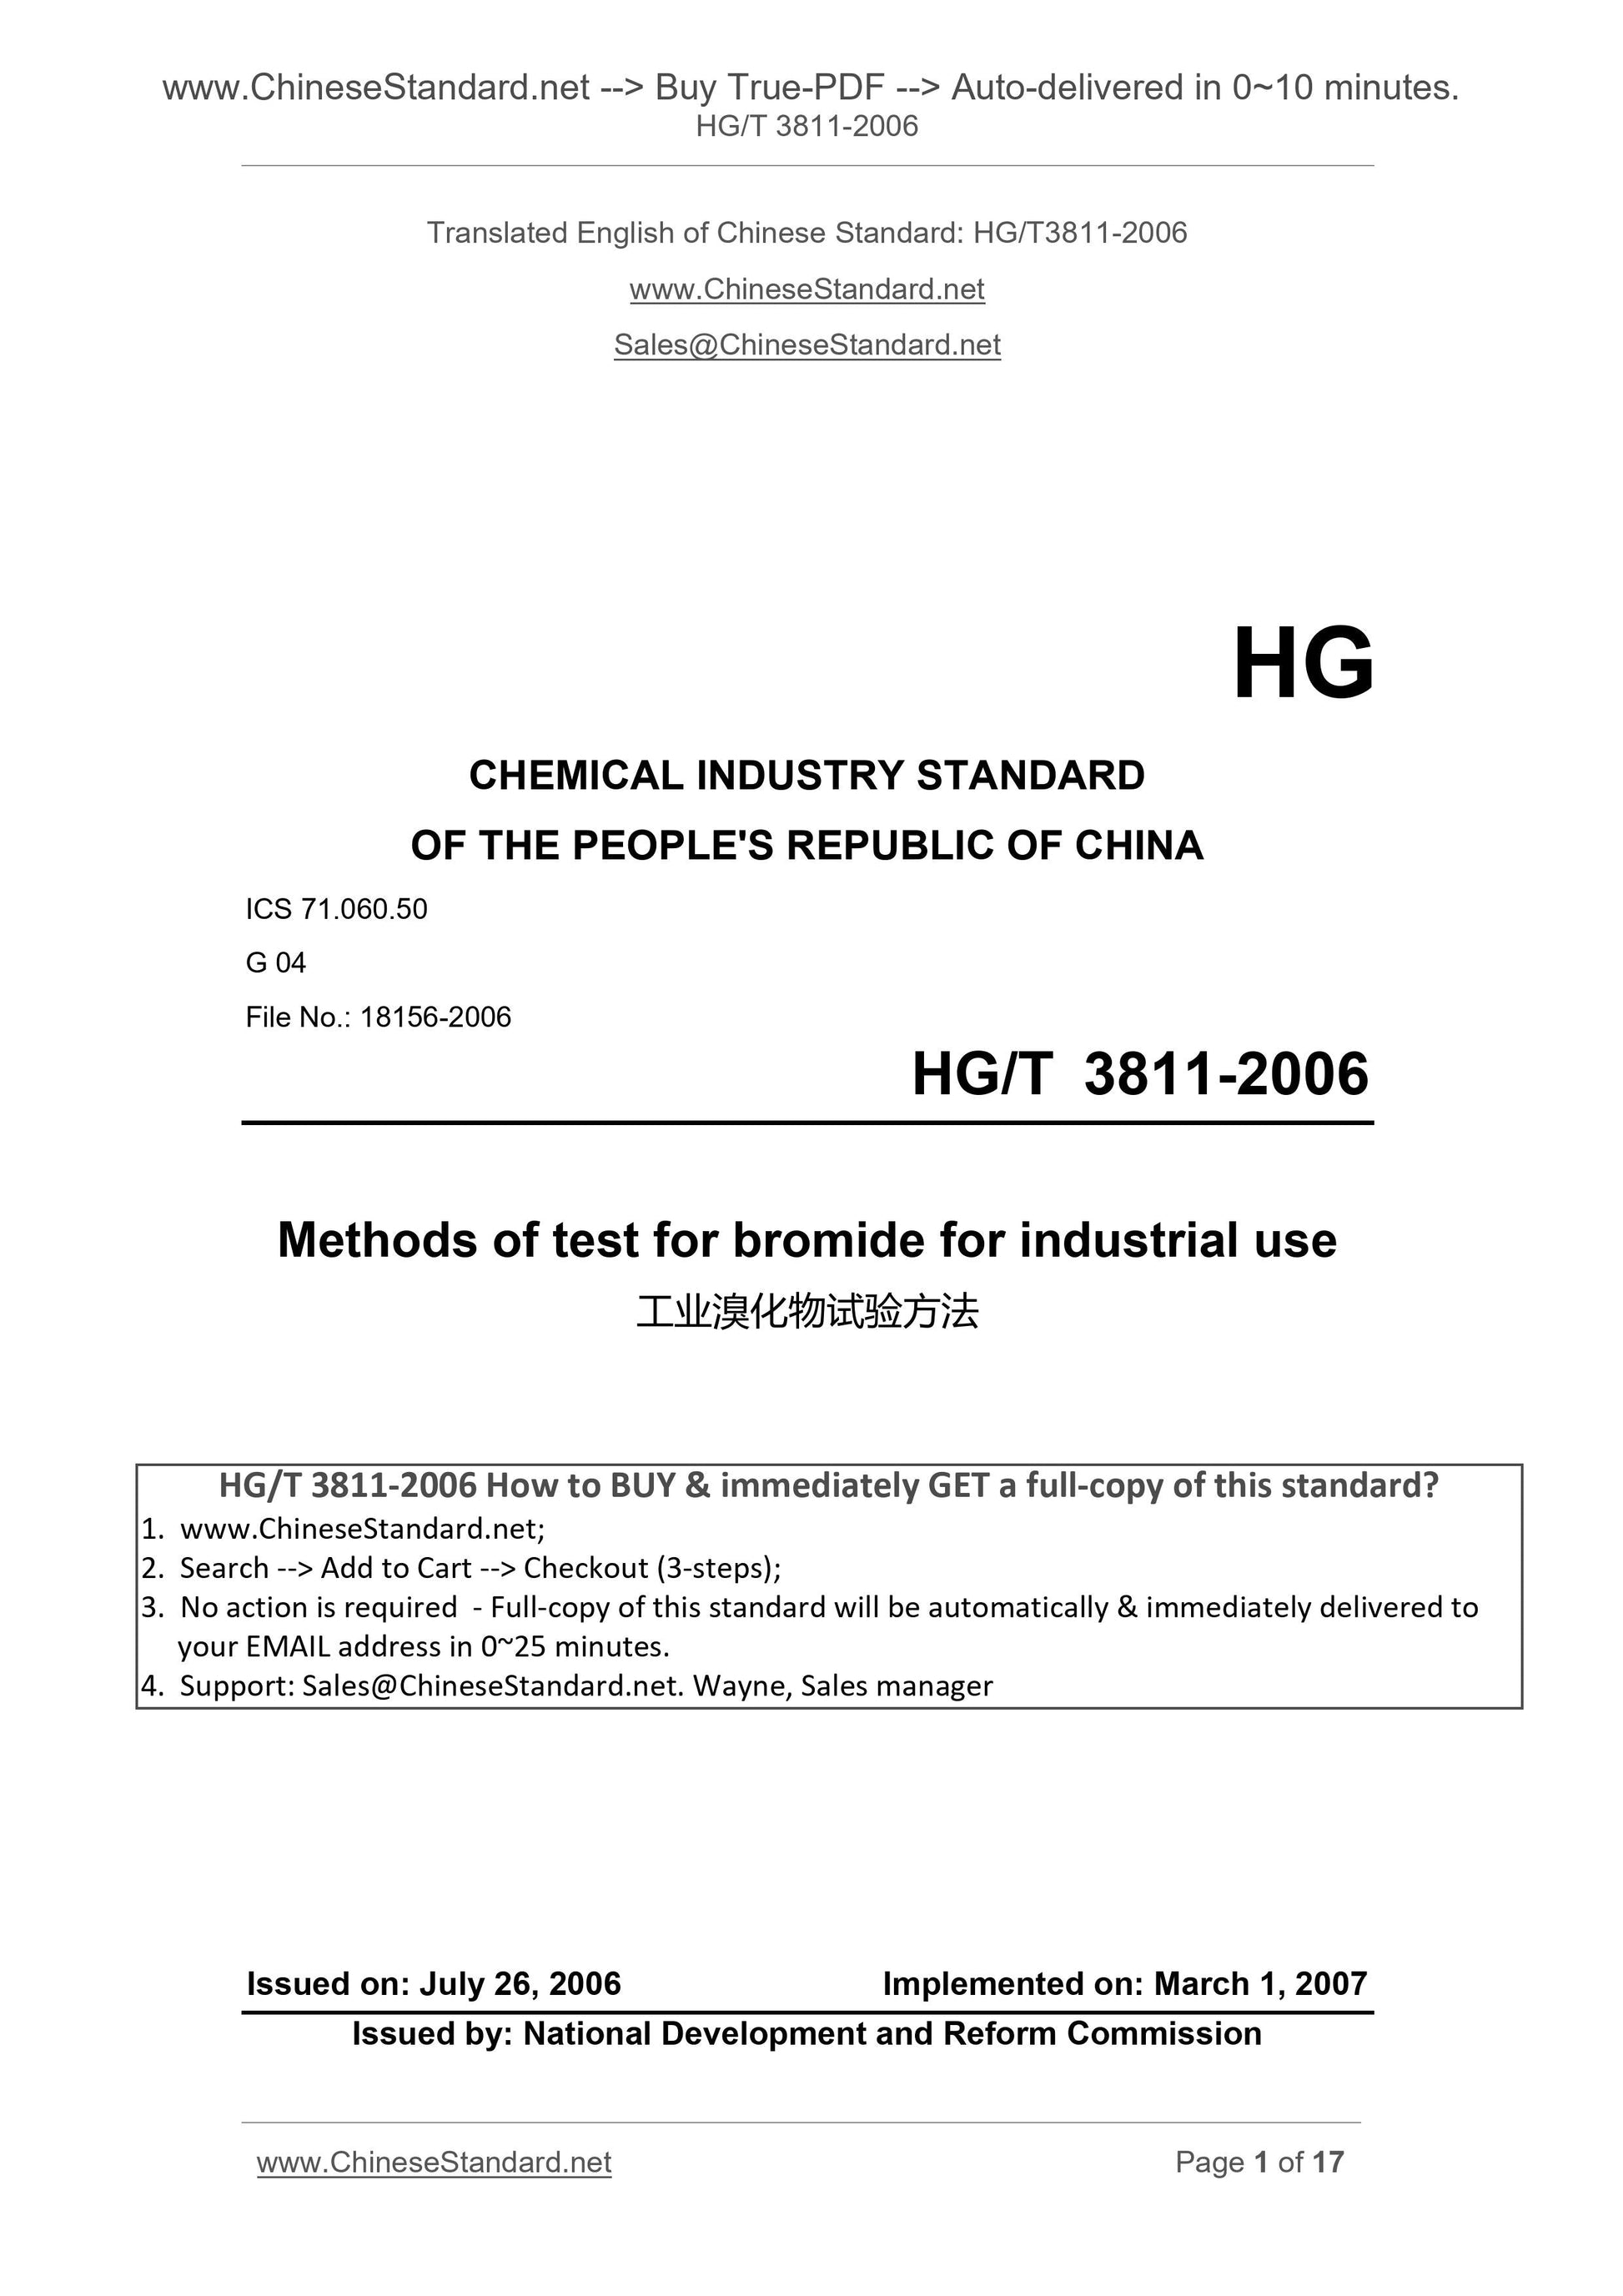 HG/T 3811-2006 Page 1